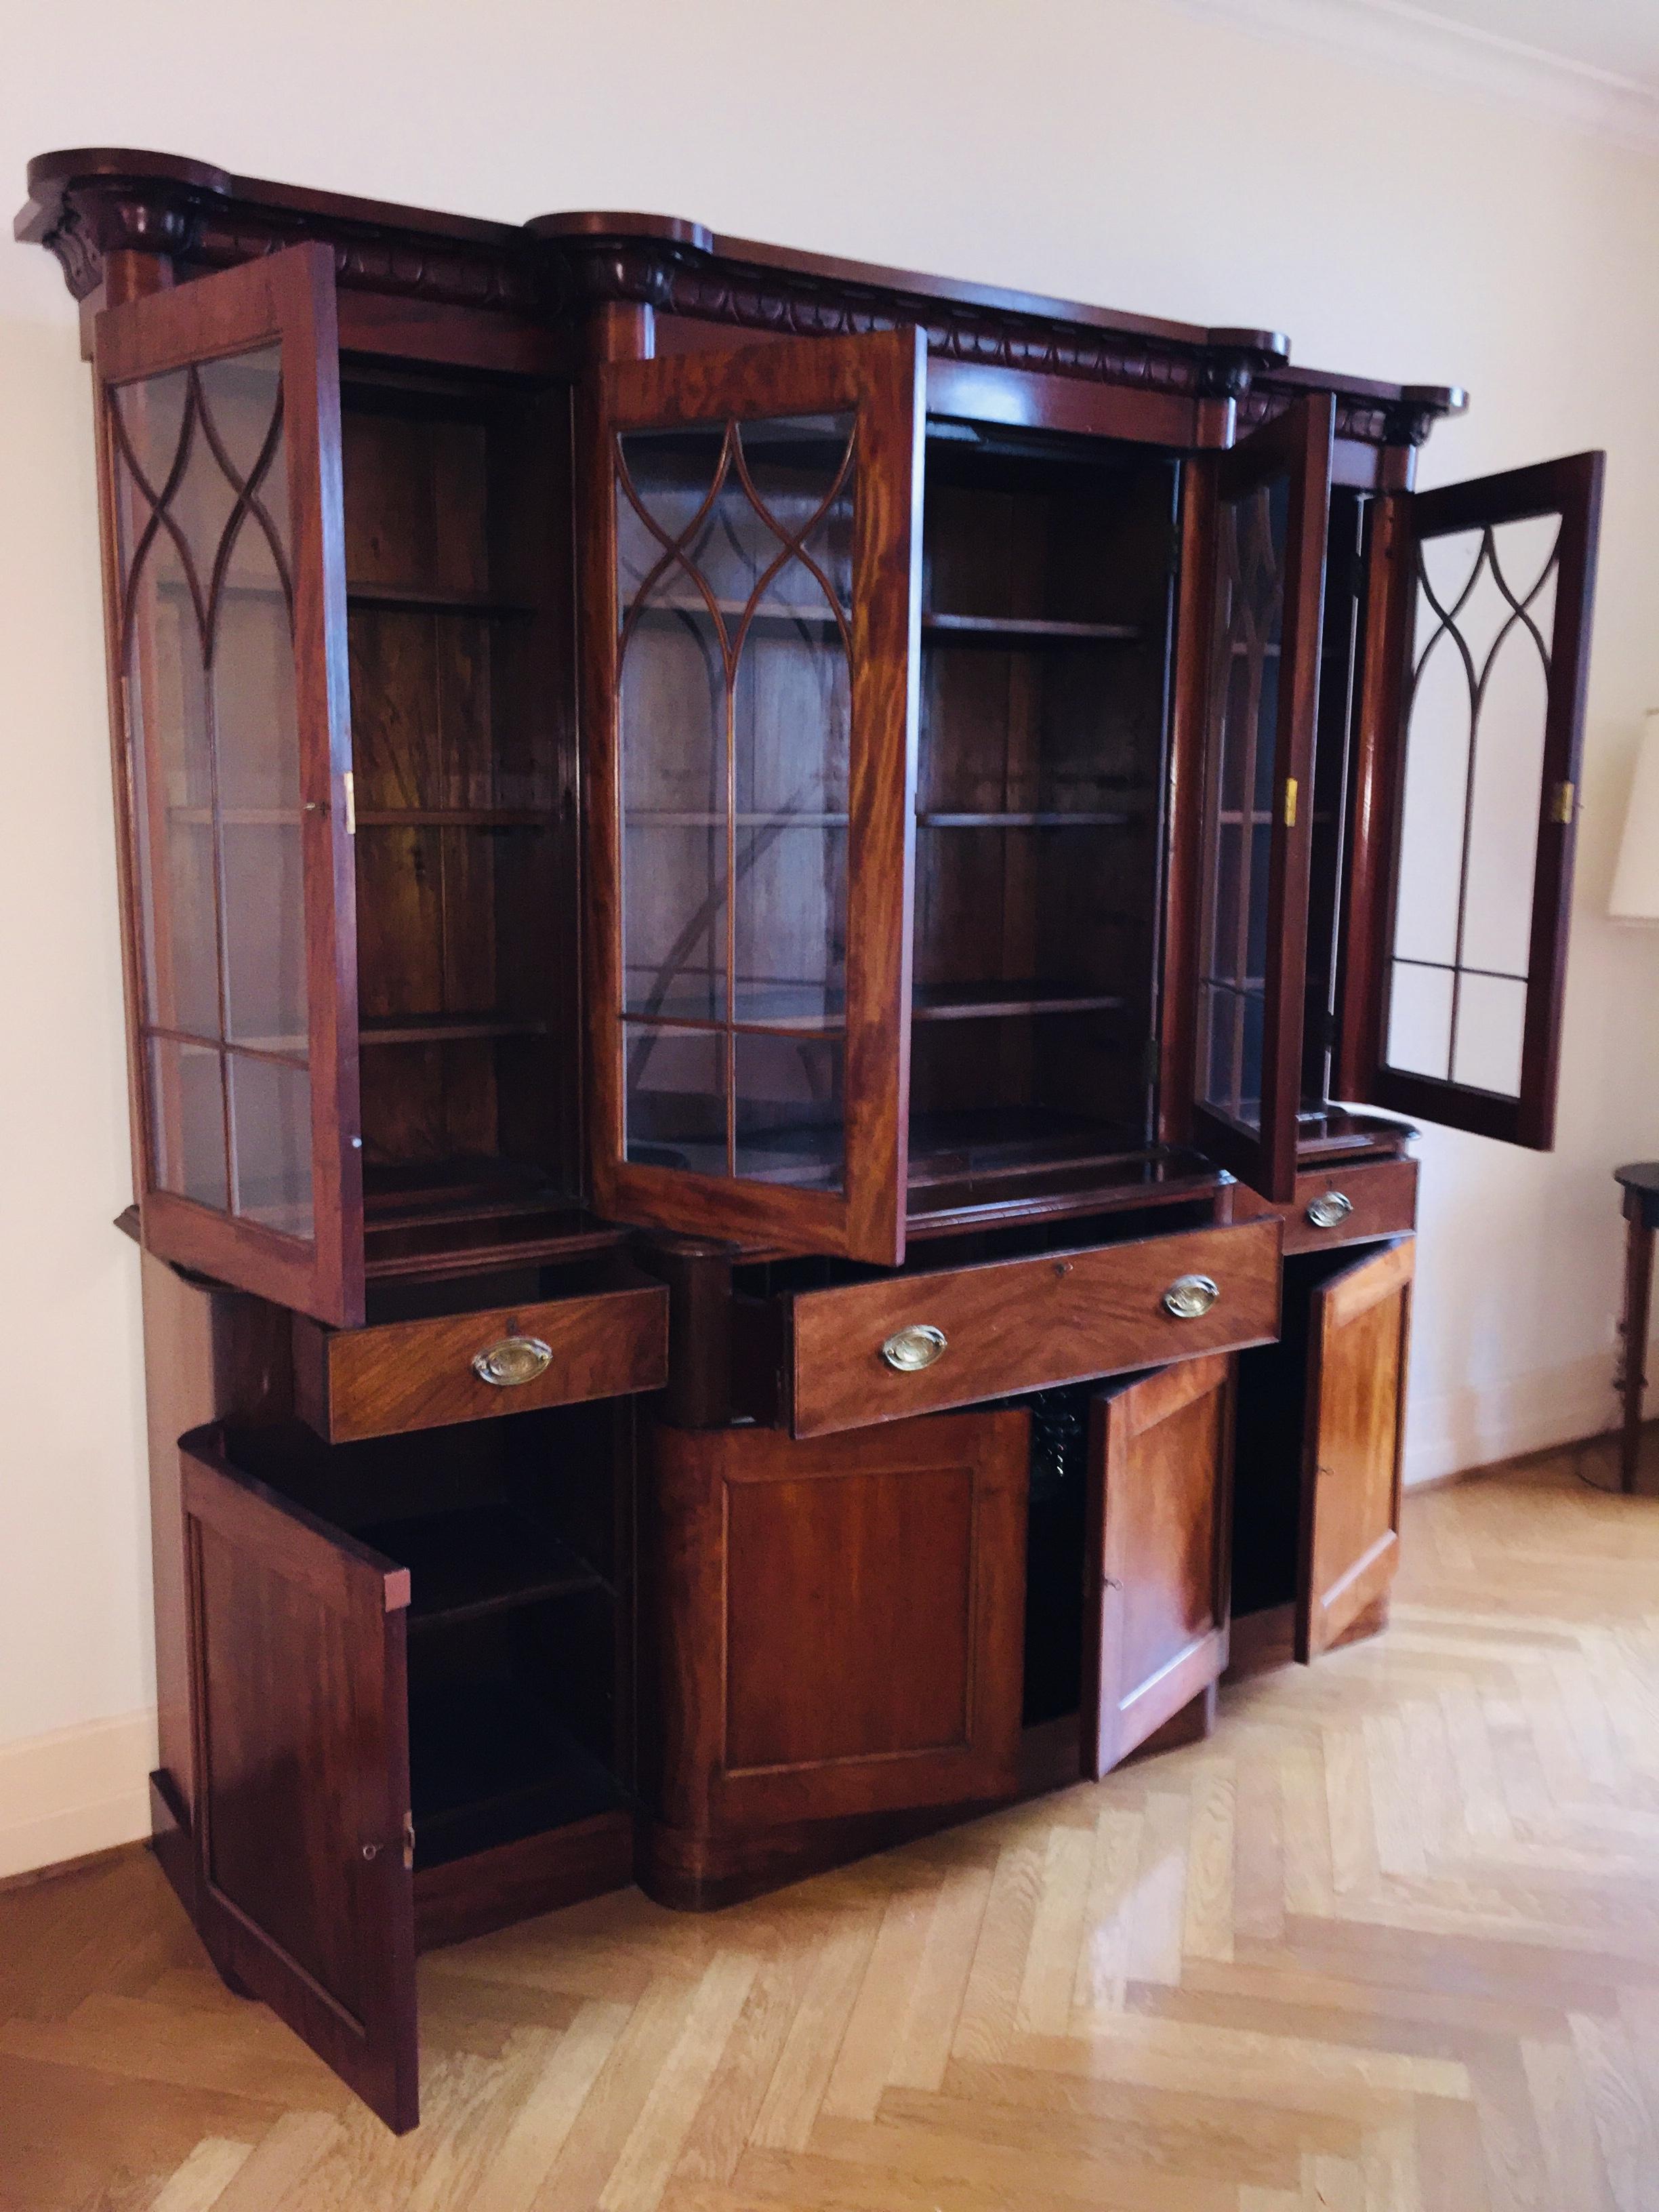 Stunning antique English Victorian St great quality four doors bookcase display writing desk cabinet in flamed solid mahogany, circa 1890.
Elegant masterfully crafted refined piece of furniture, break front cornice elegantly crafted, over four